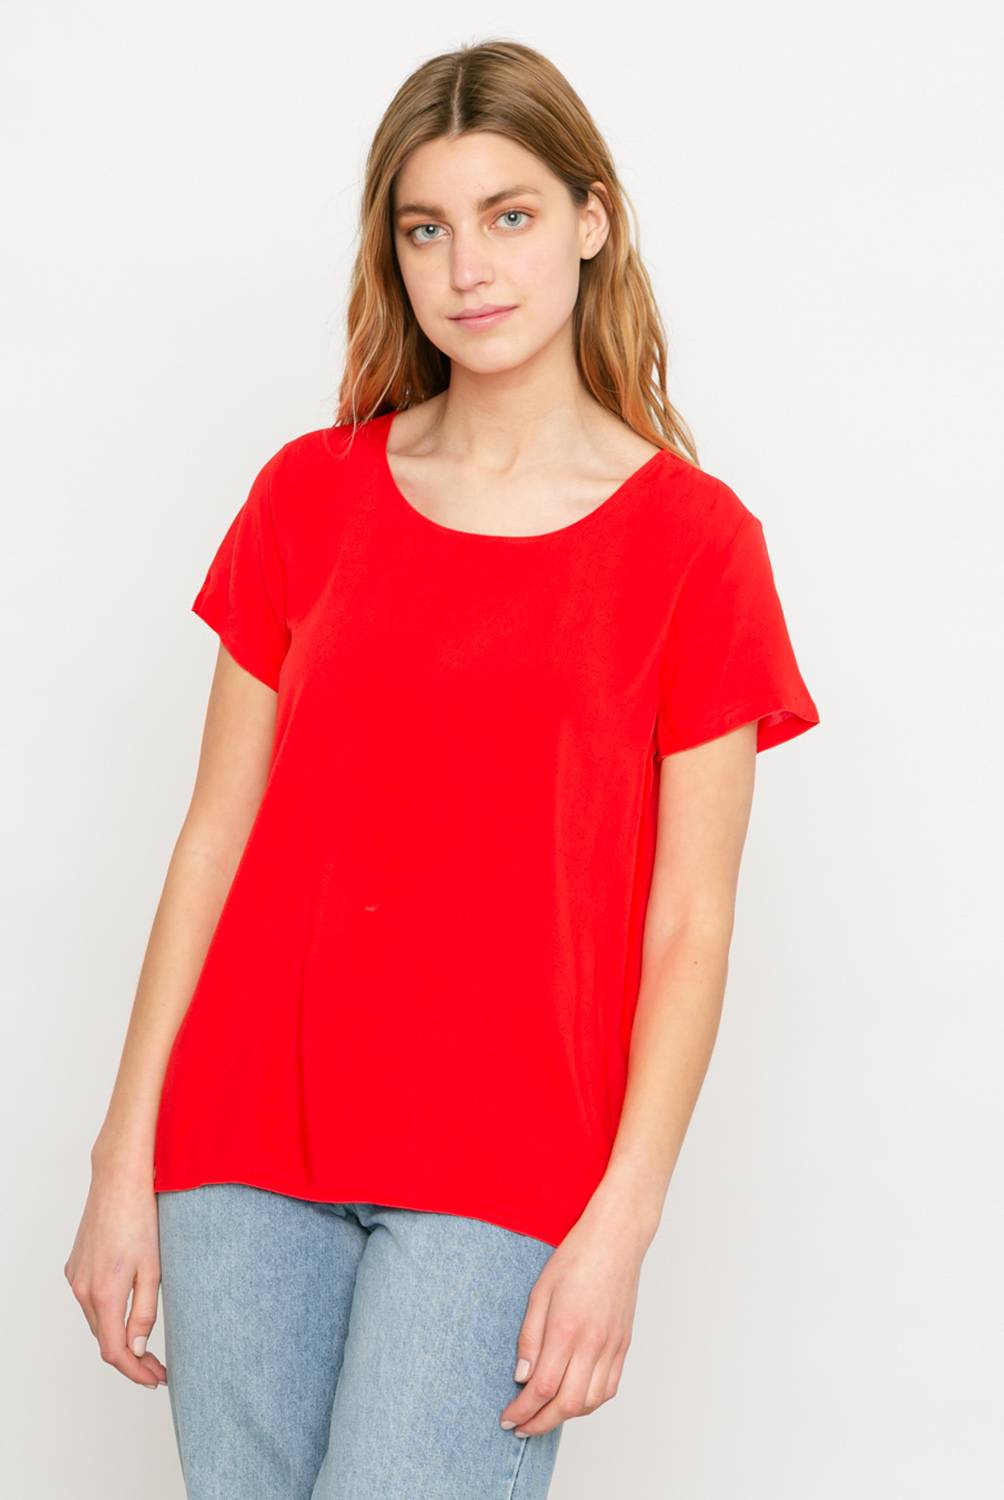 ONLY - Blusa Mujer